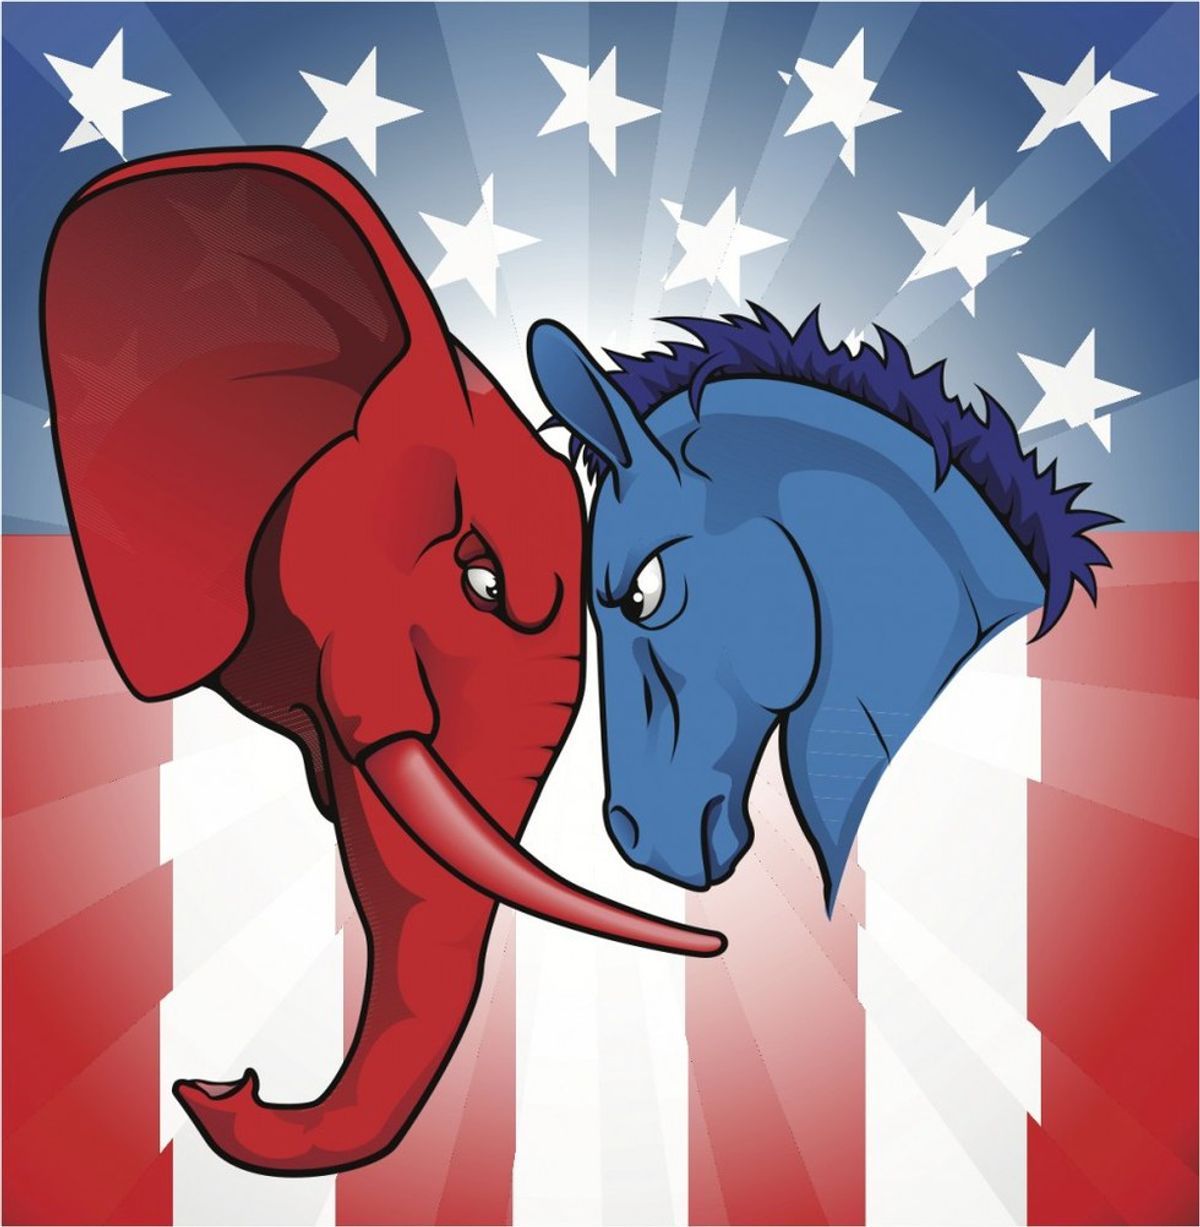 Why We Should Re-think The Two Party Systems